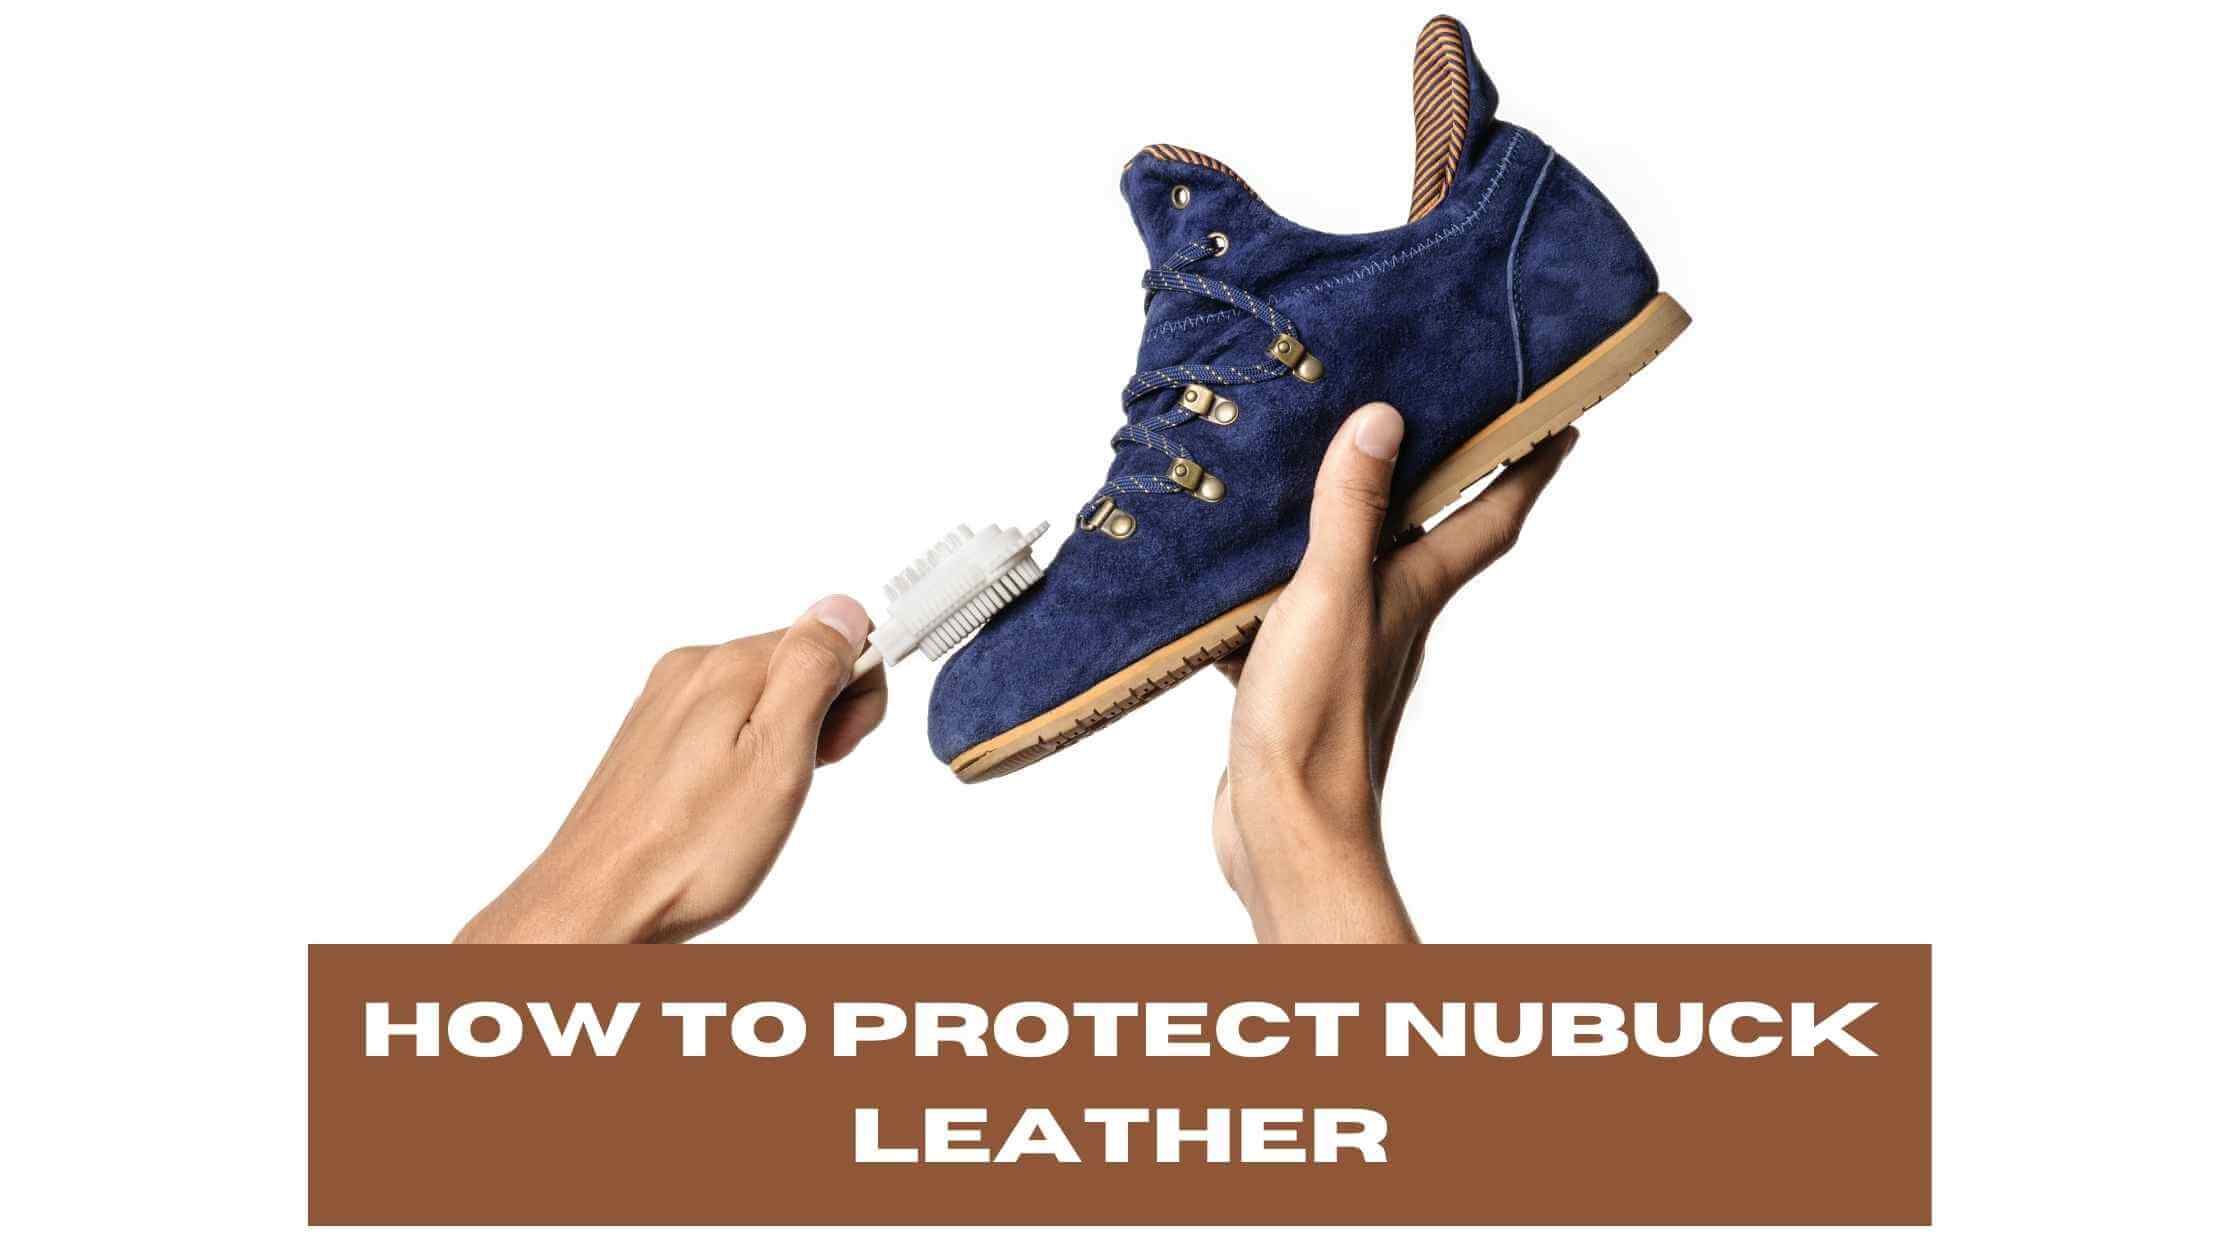 How to Protect Nubuck Leather